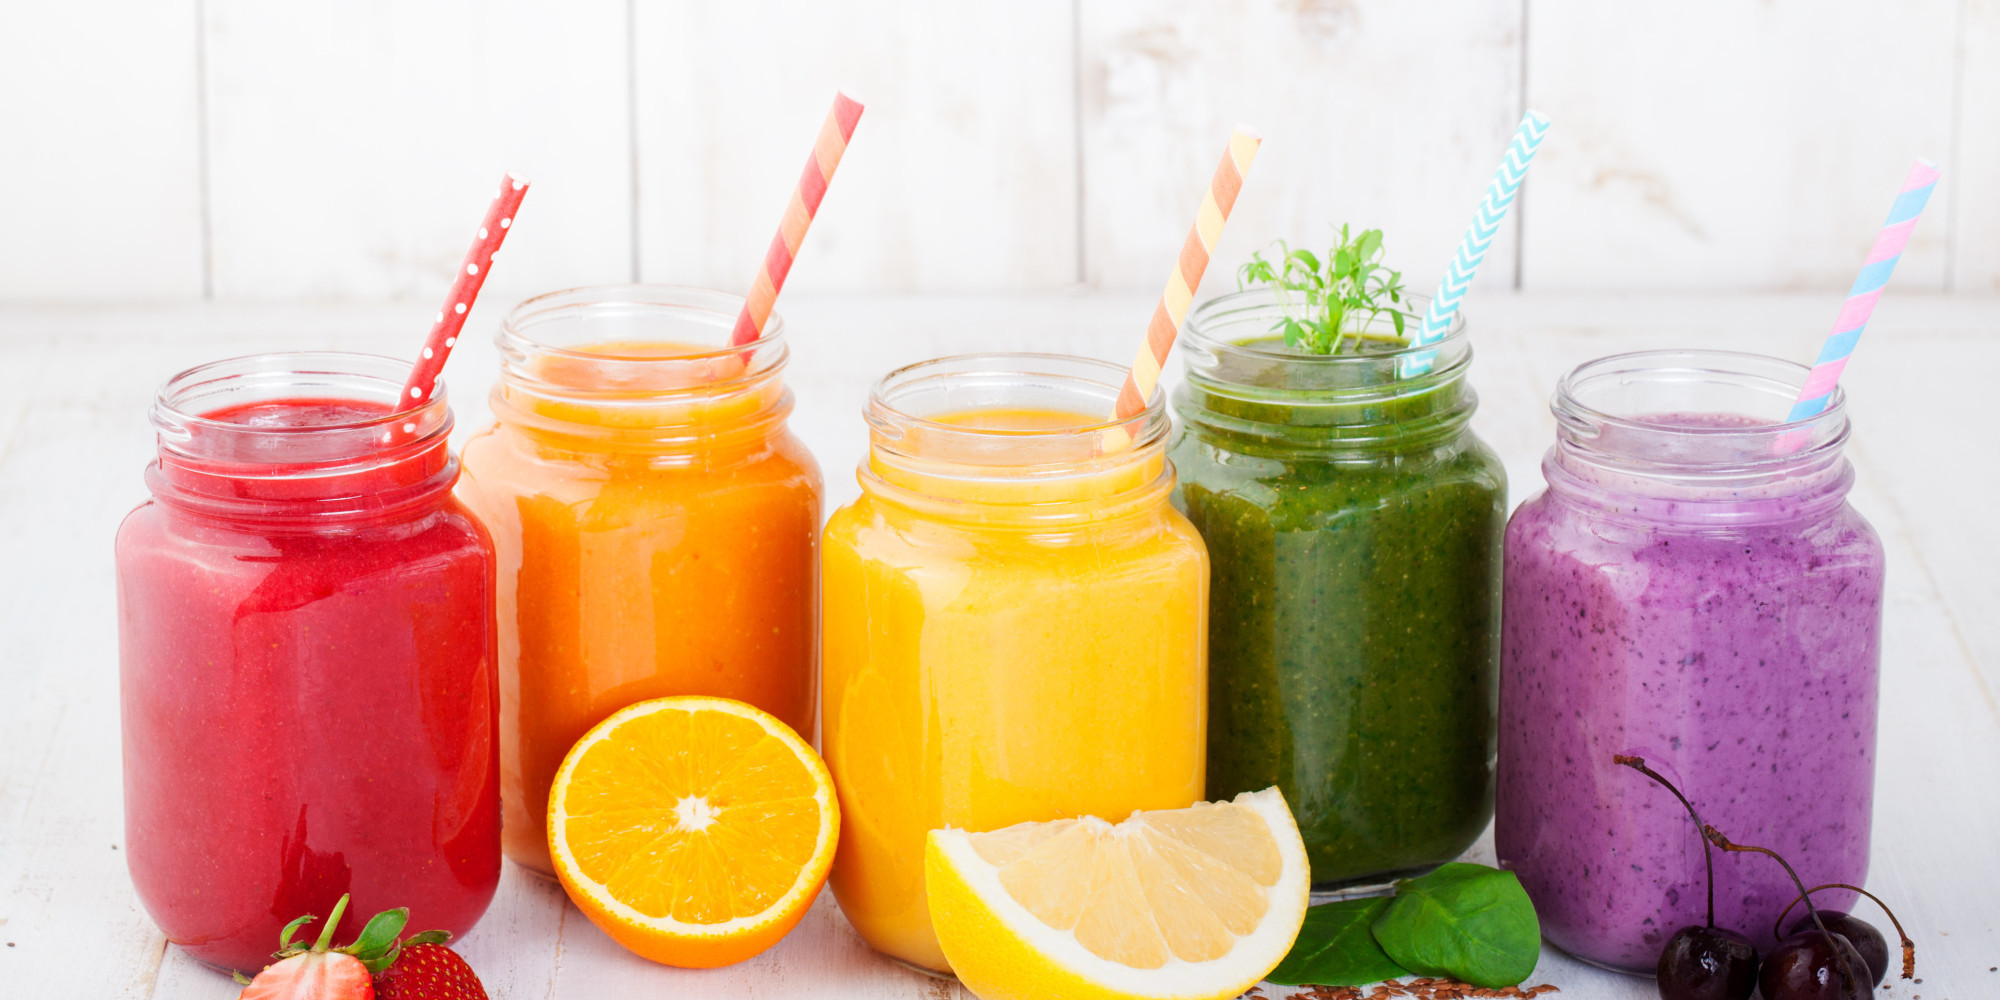 Healthy Smoothies Restaurants
 Smoothie Guide for Cafes Restaurants and Concession